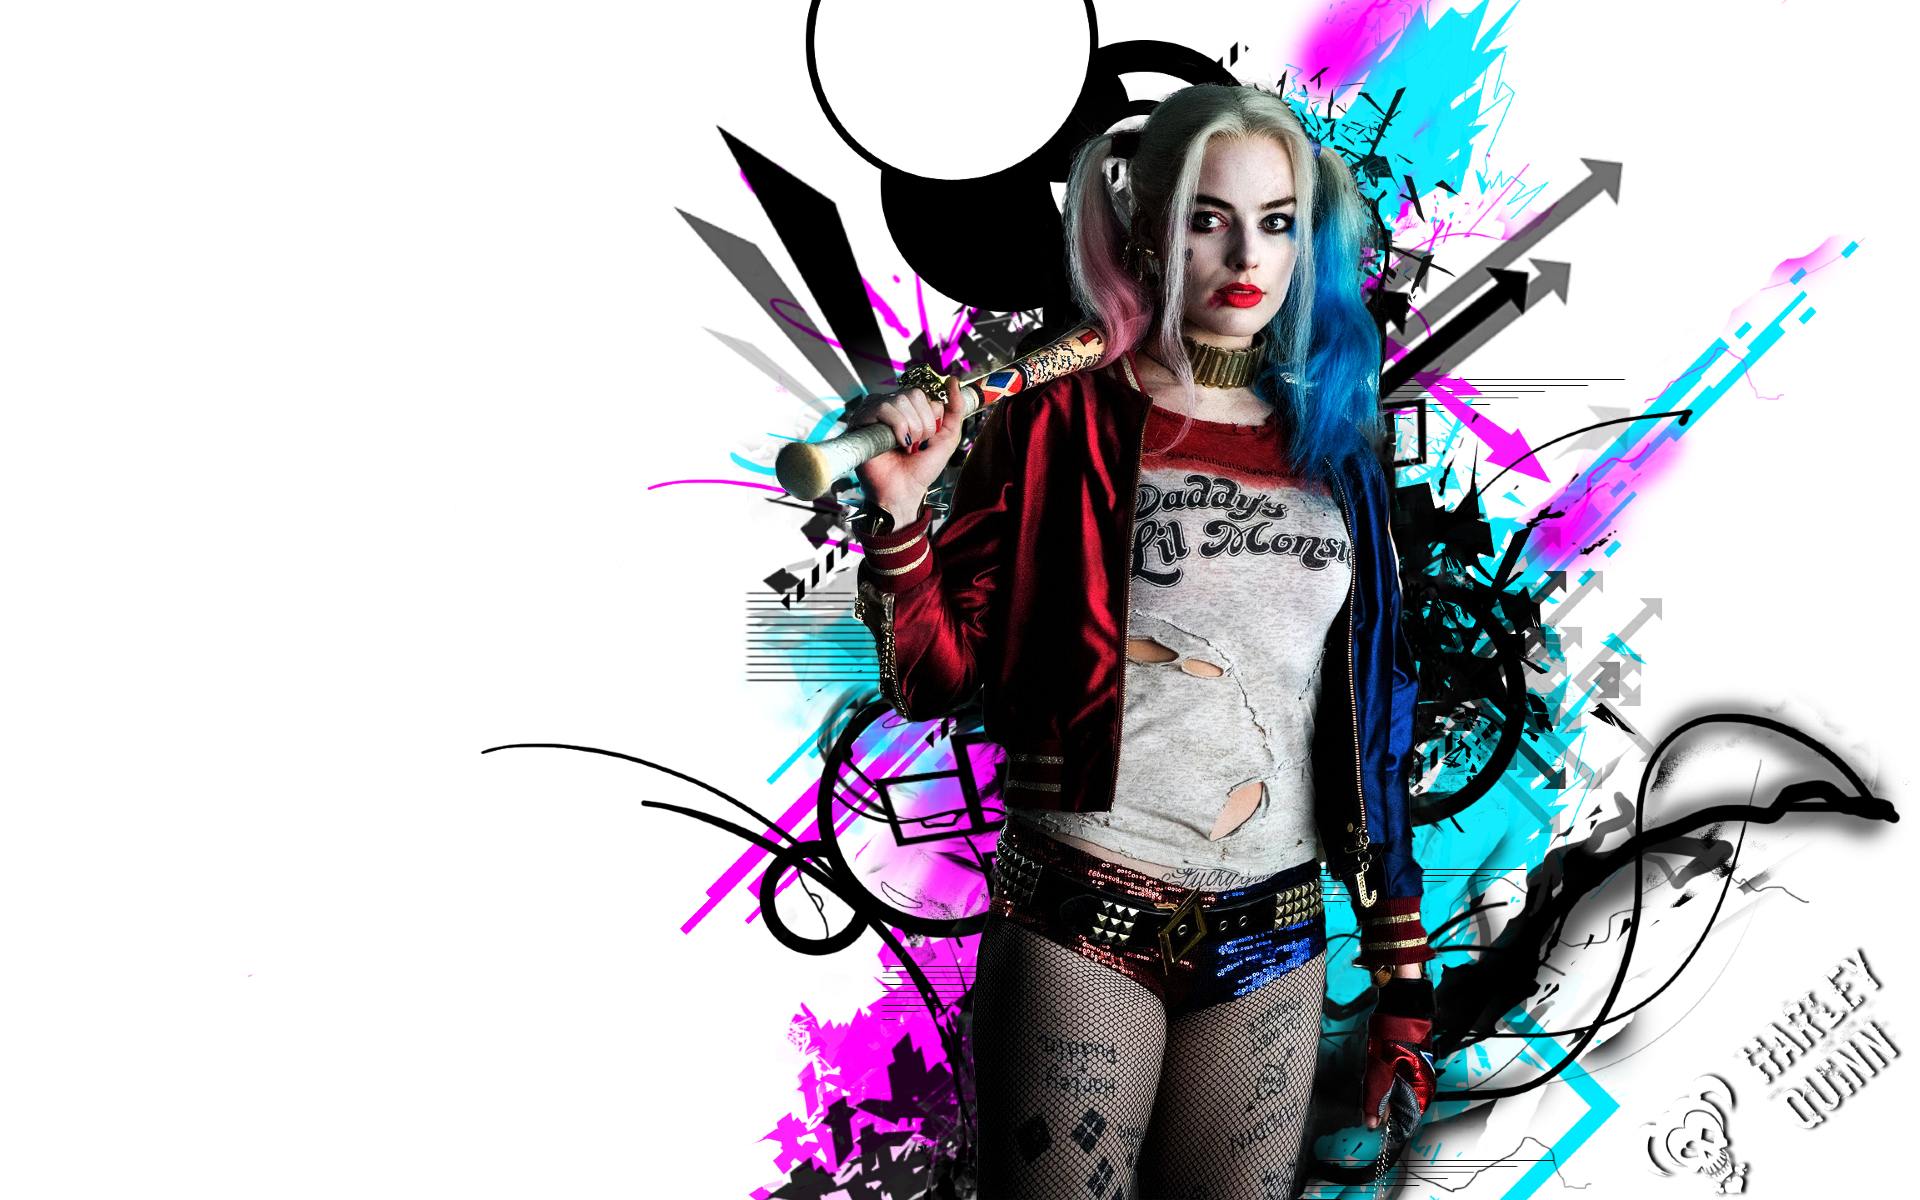 wallpapers of harley quinn,graphic design,illustration,fashion,graphics,cool